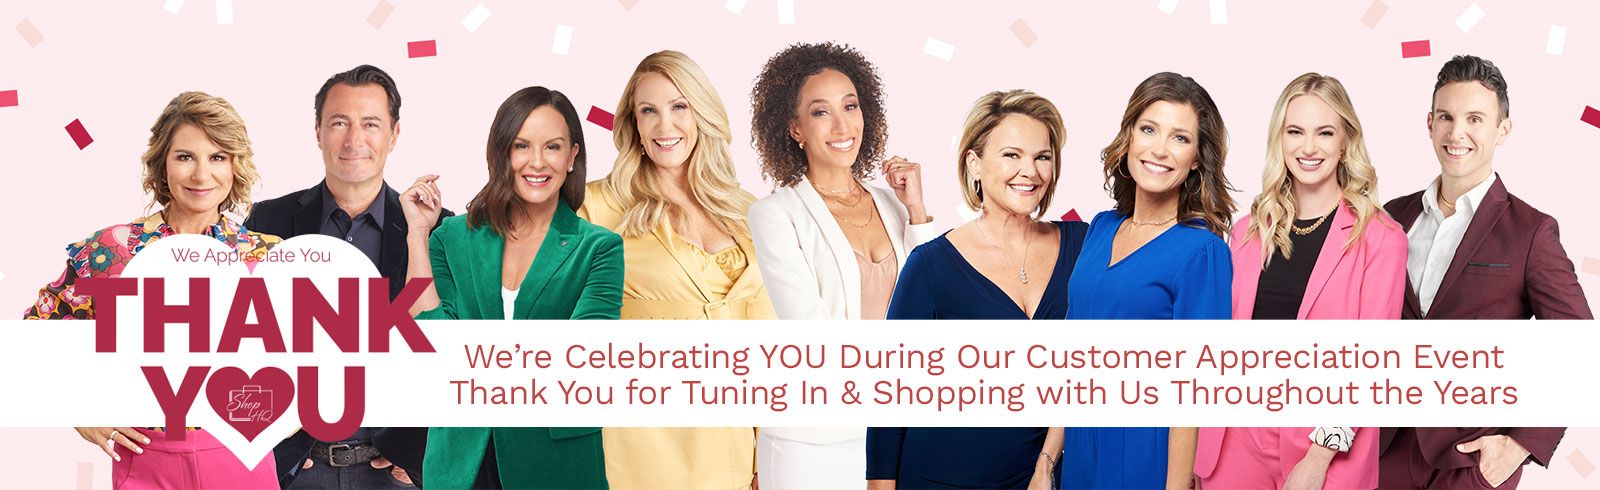 Thank You! We're Celebrating YOU During Our Customer Appreciation Event  Thank You for Tuning In & Shopping with Us Throughout the Years